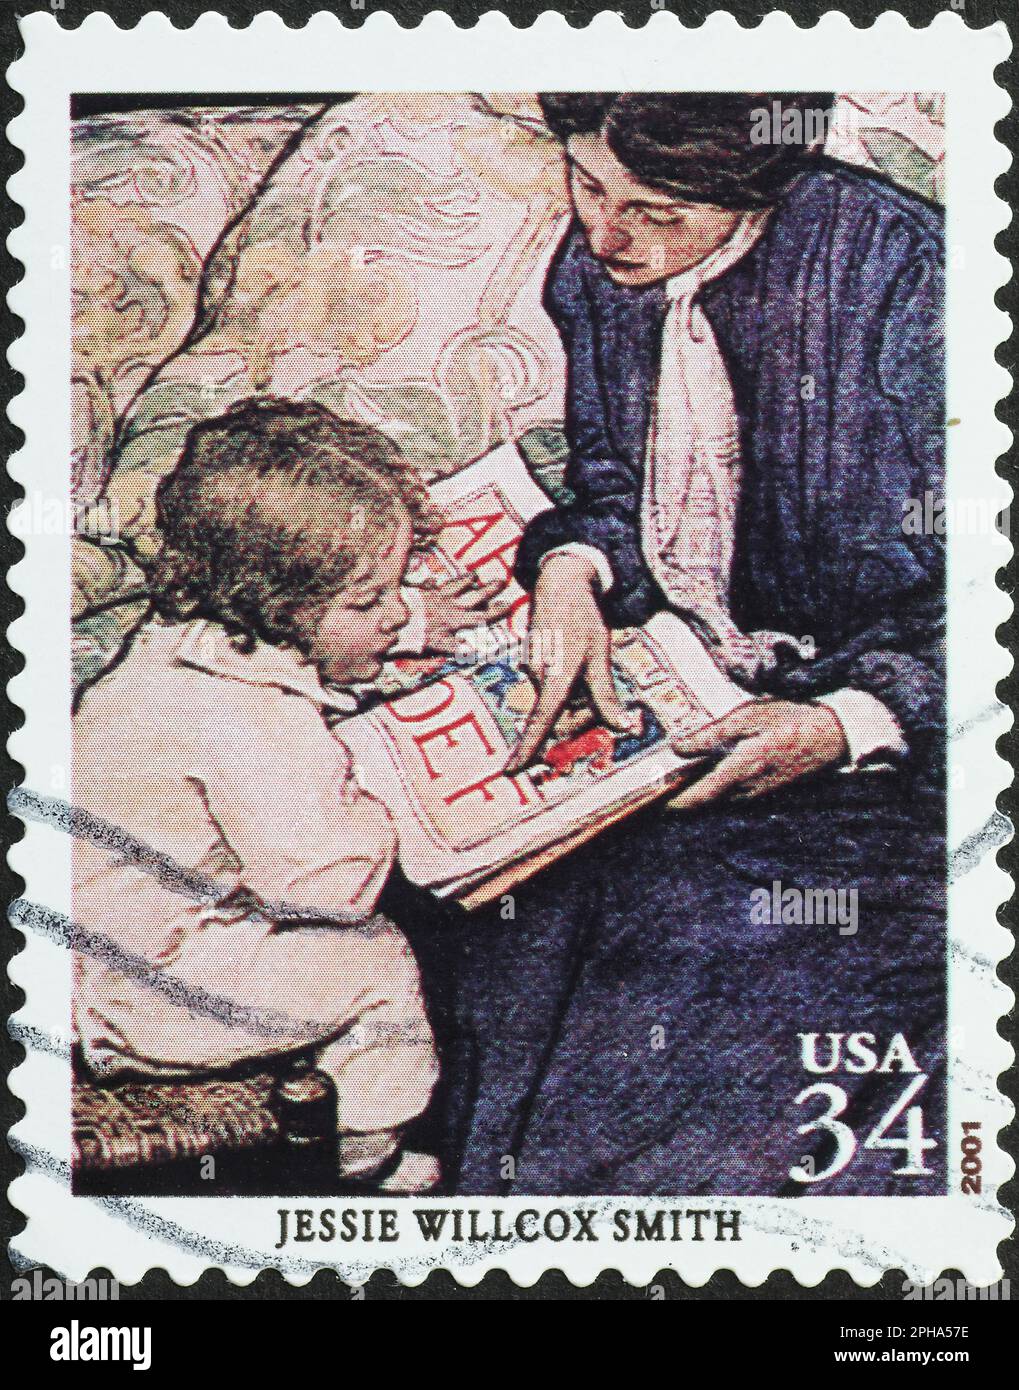 Illustration by Jessie Wilcox Smith on american postage stamp Stock Photo